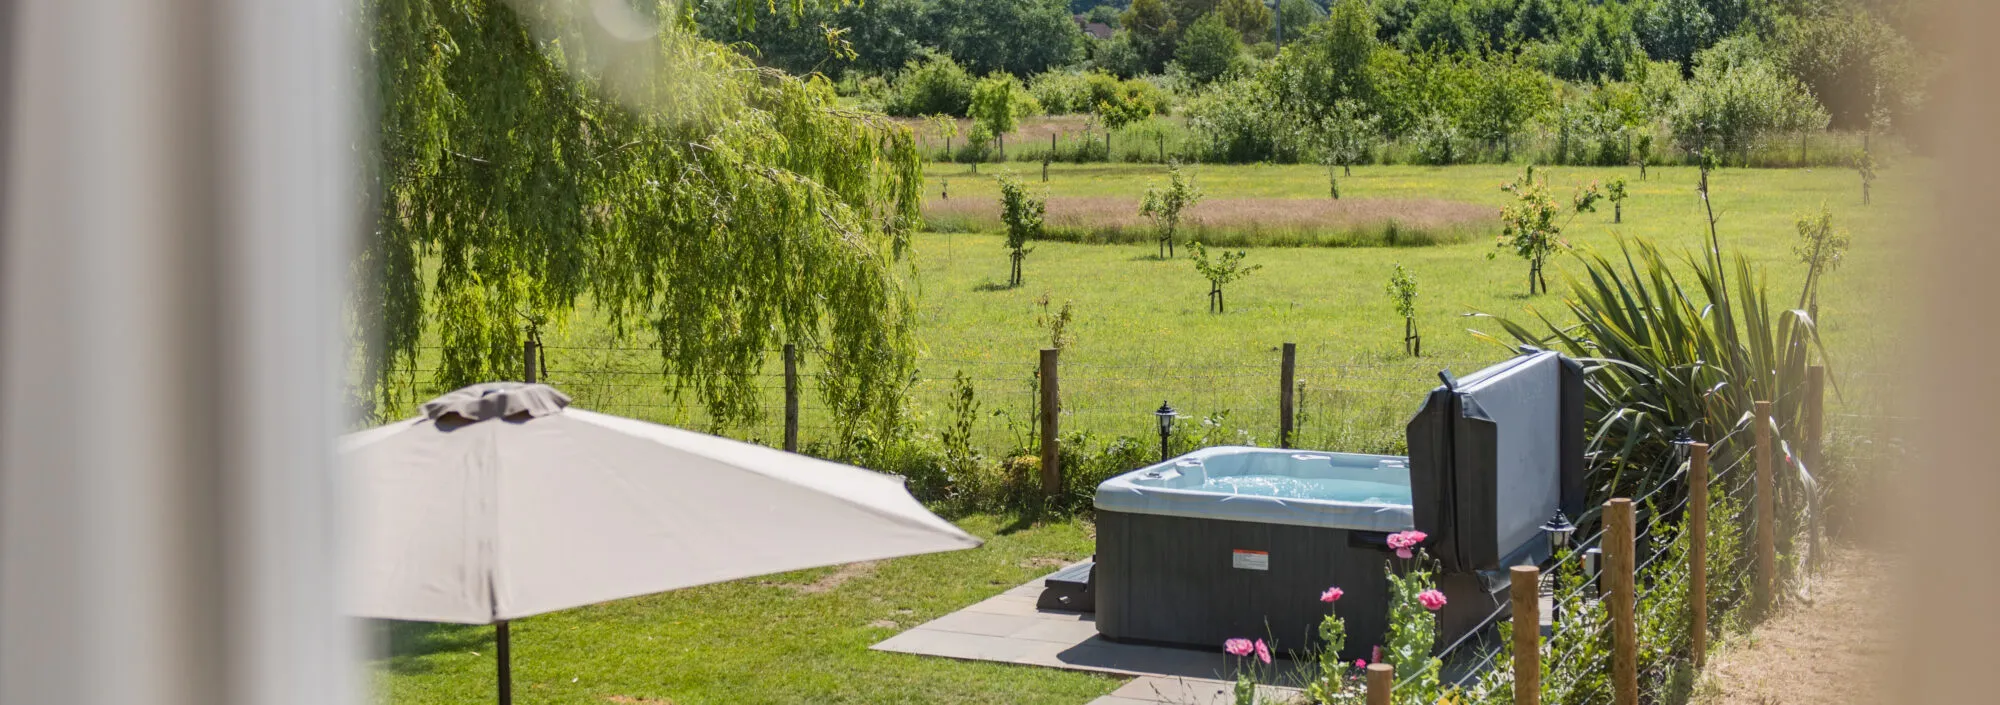 Holiday home with a hot tub near to Canterbury